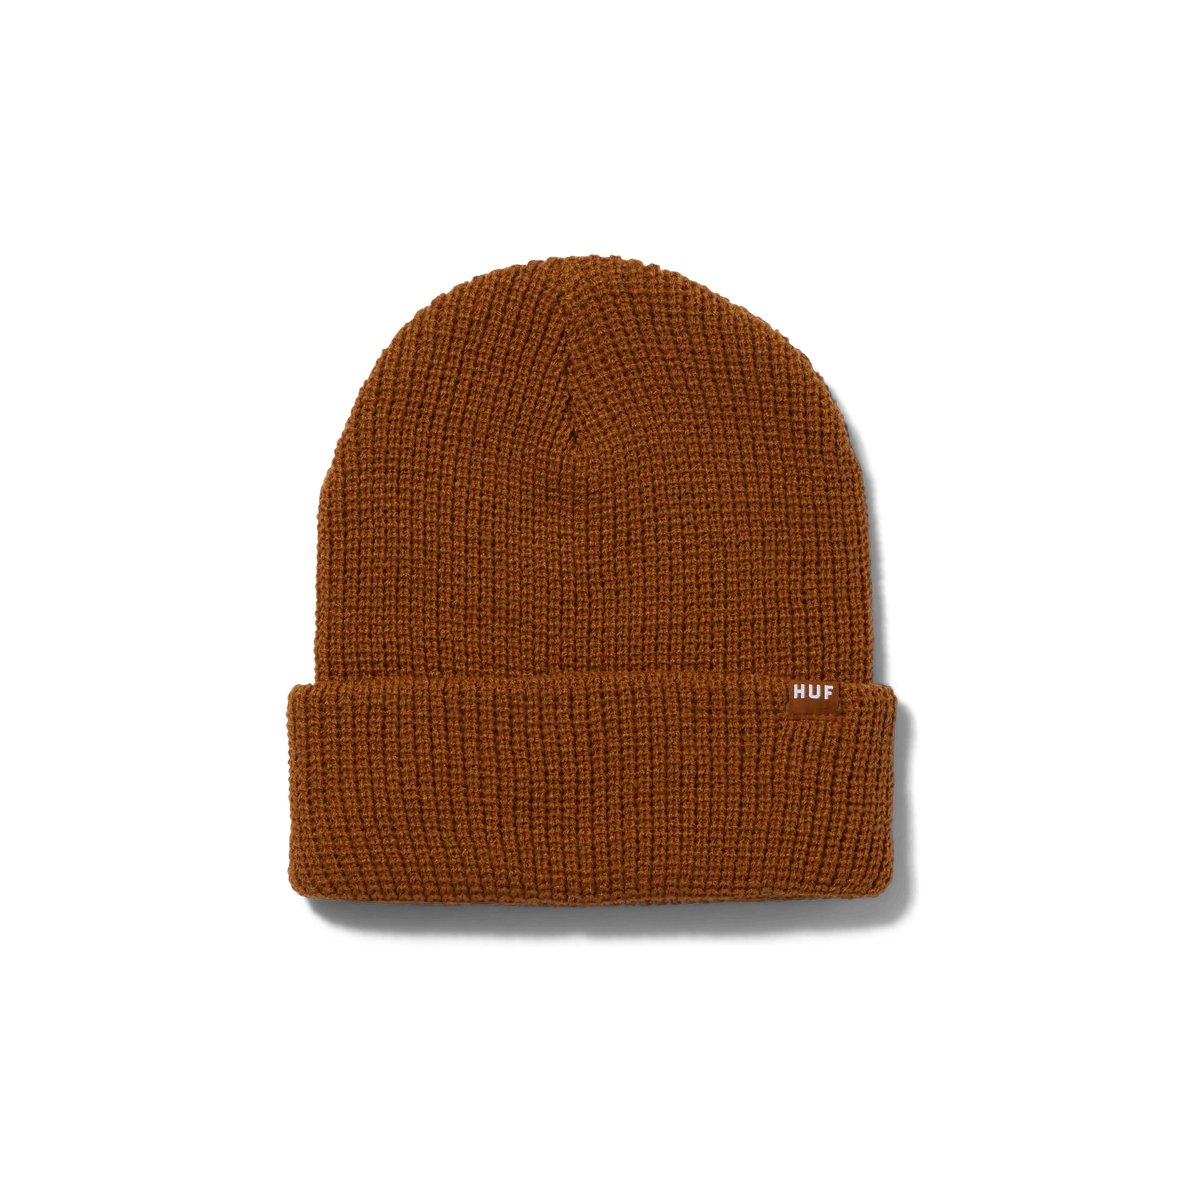 HUF Set Usual Beanie - Rubber - VENUE.